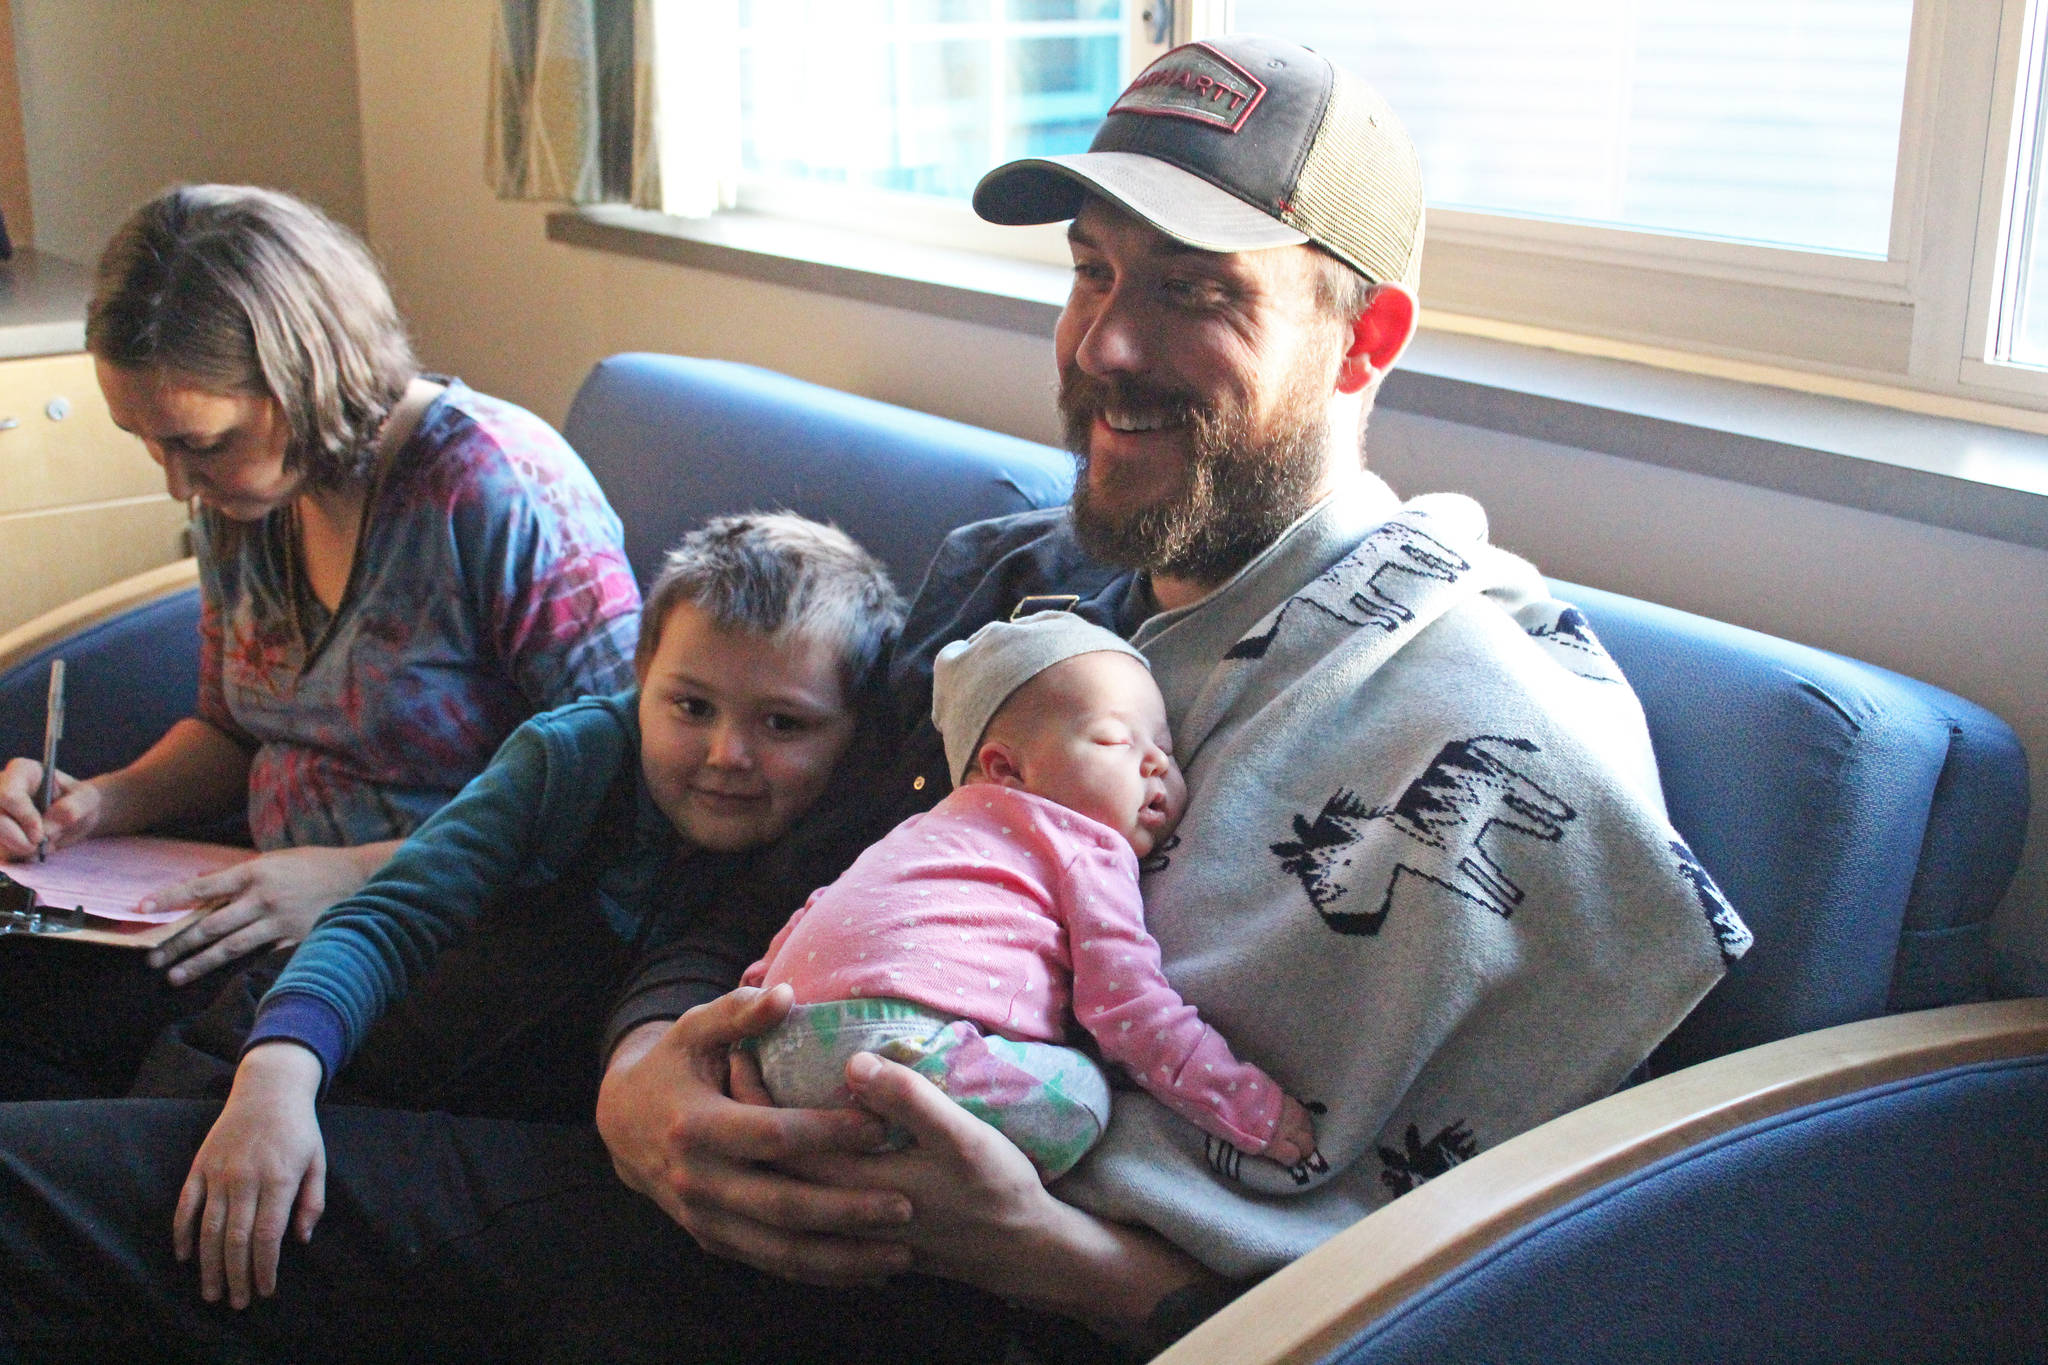 <span class="neFMT neFMT_PhotoCredit">Photo by Megan Pacer/Homer News</span>                                Owen Bettinger and his son, Juneau, relax with new daughter, Sequoia, while his wife, Allyse, fills out some paperwork Tuesday, Jan. 8, 2019 at South Peninsula Hospital in Homer, Alaska. Sequoia was the first baby born in the new year on Jan. 1.